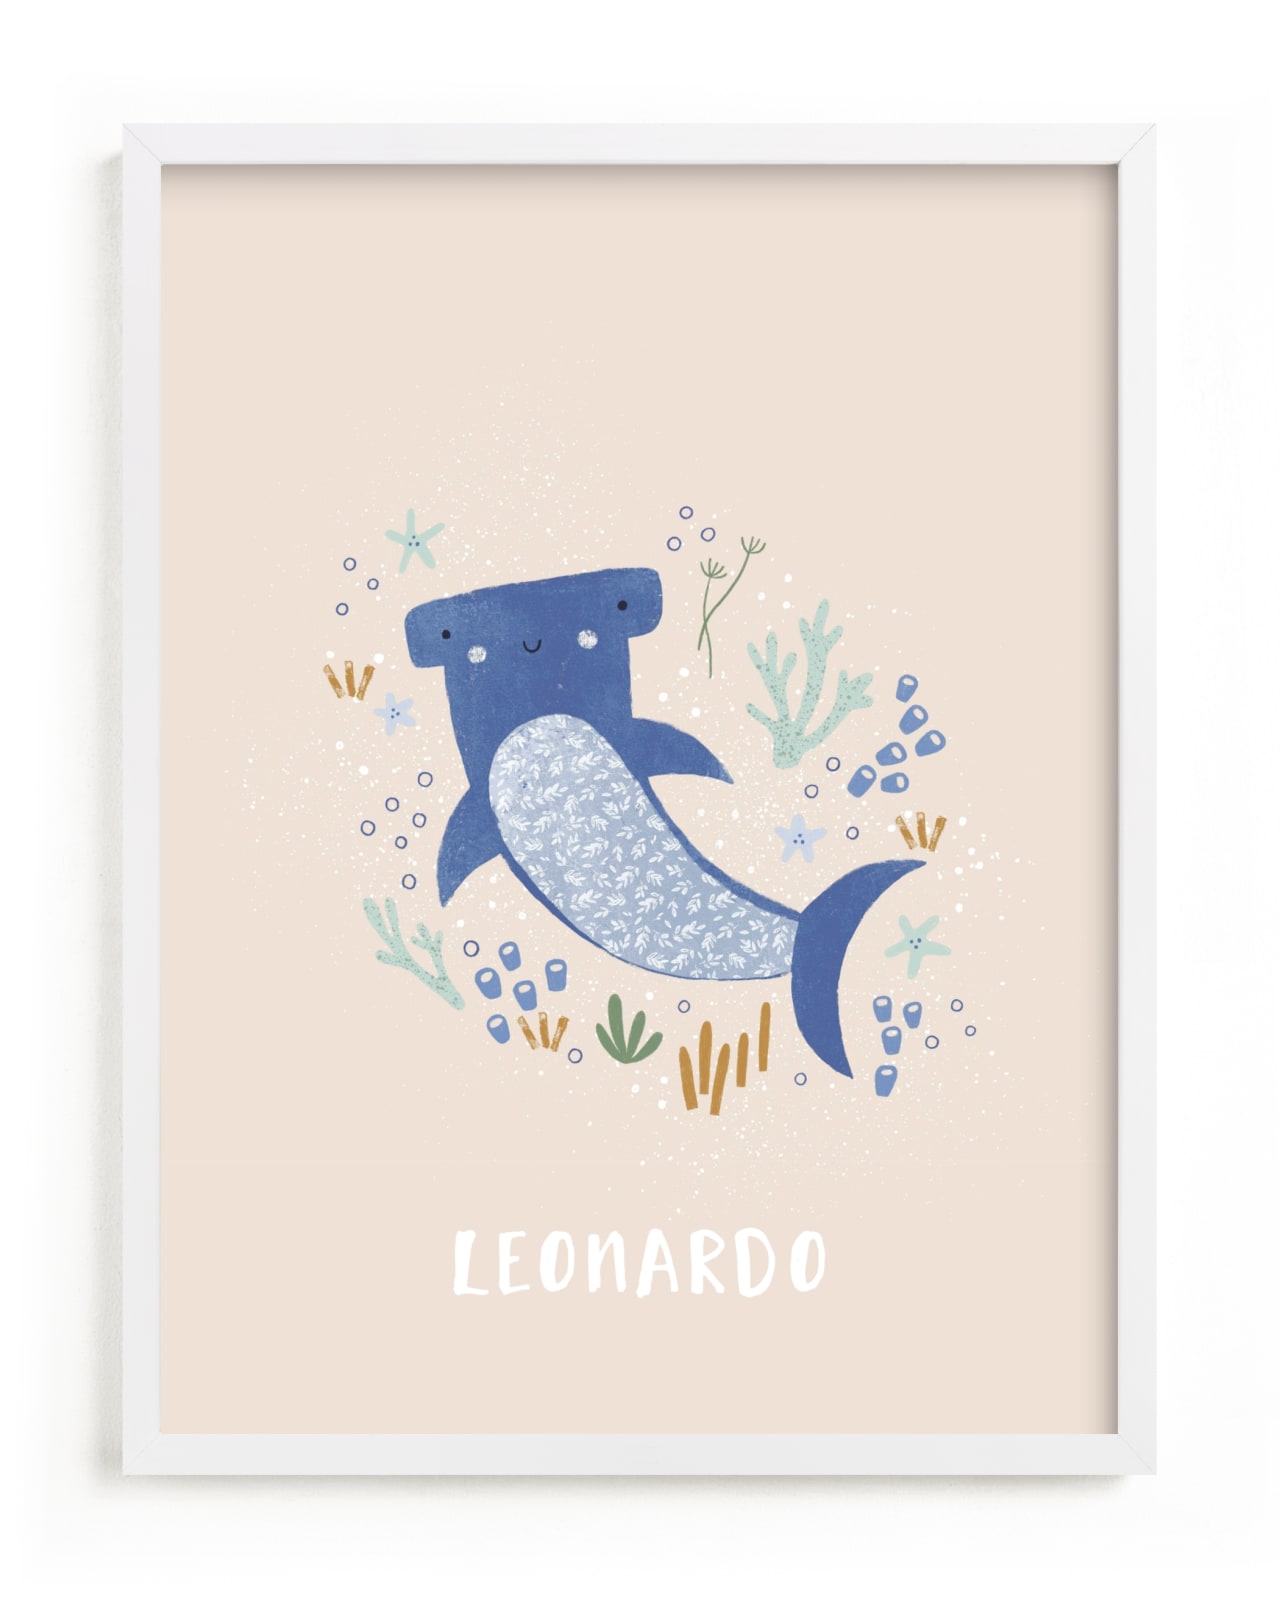 This is a blue nursery wall art by Tati Abaurre called Sharky cute.